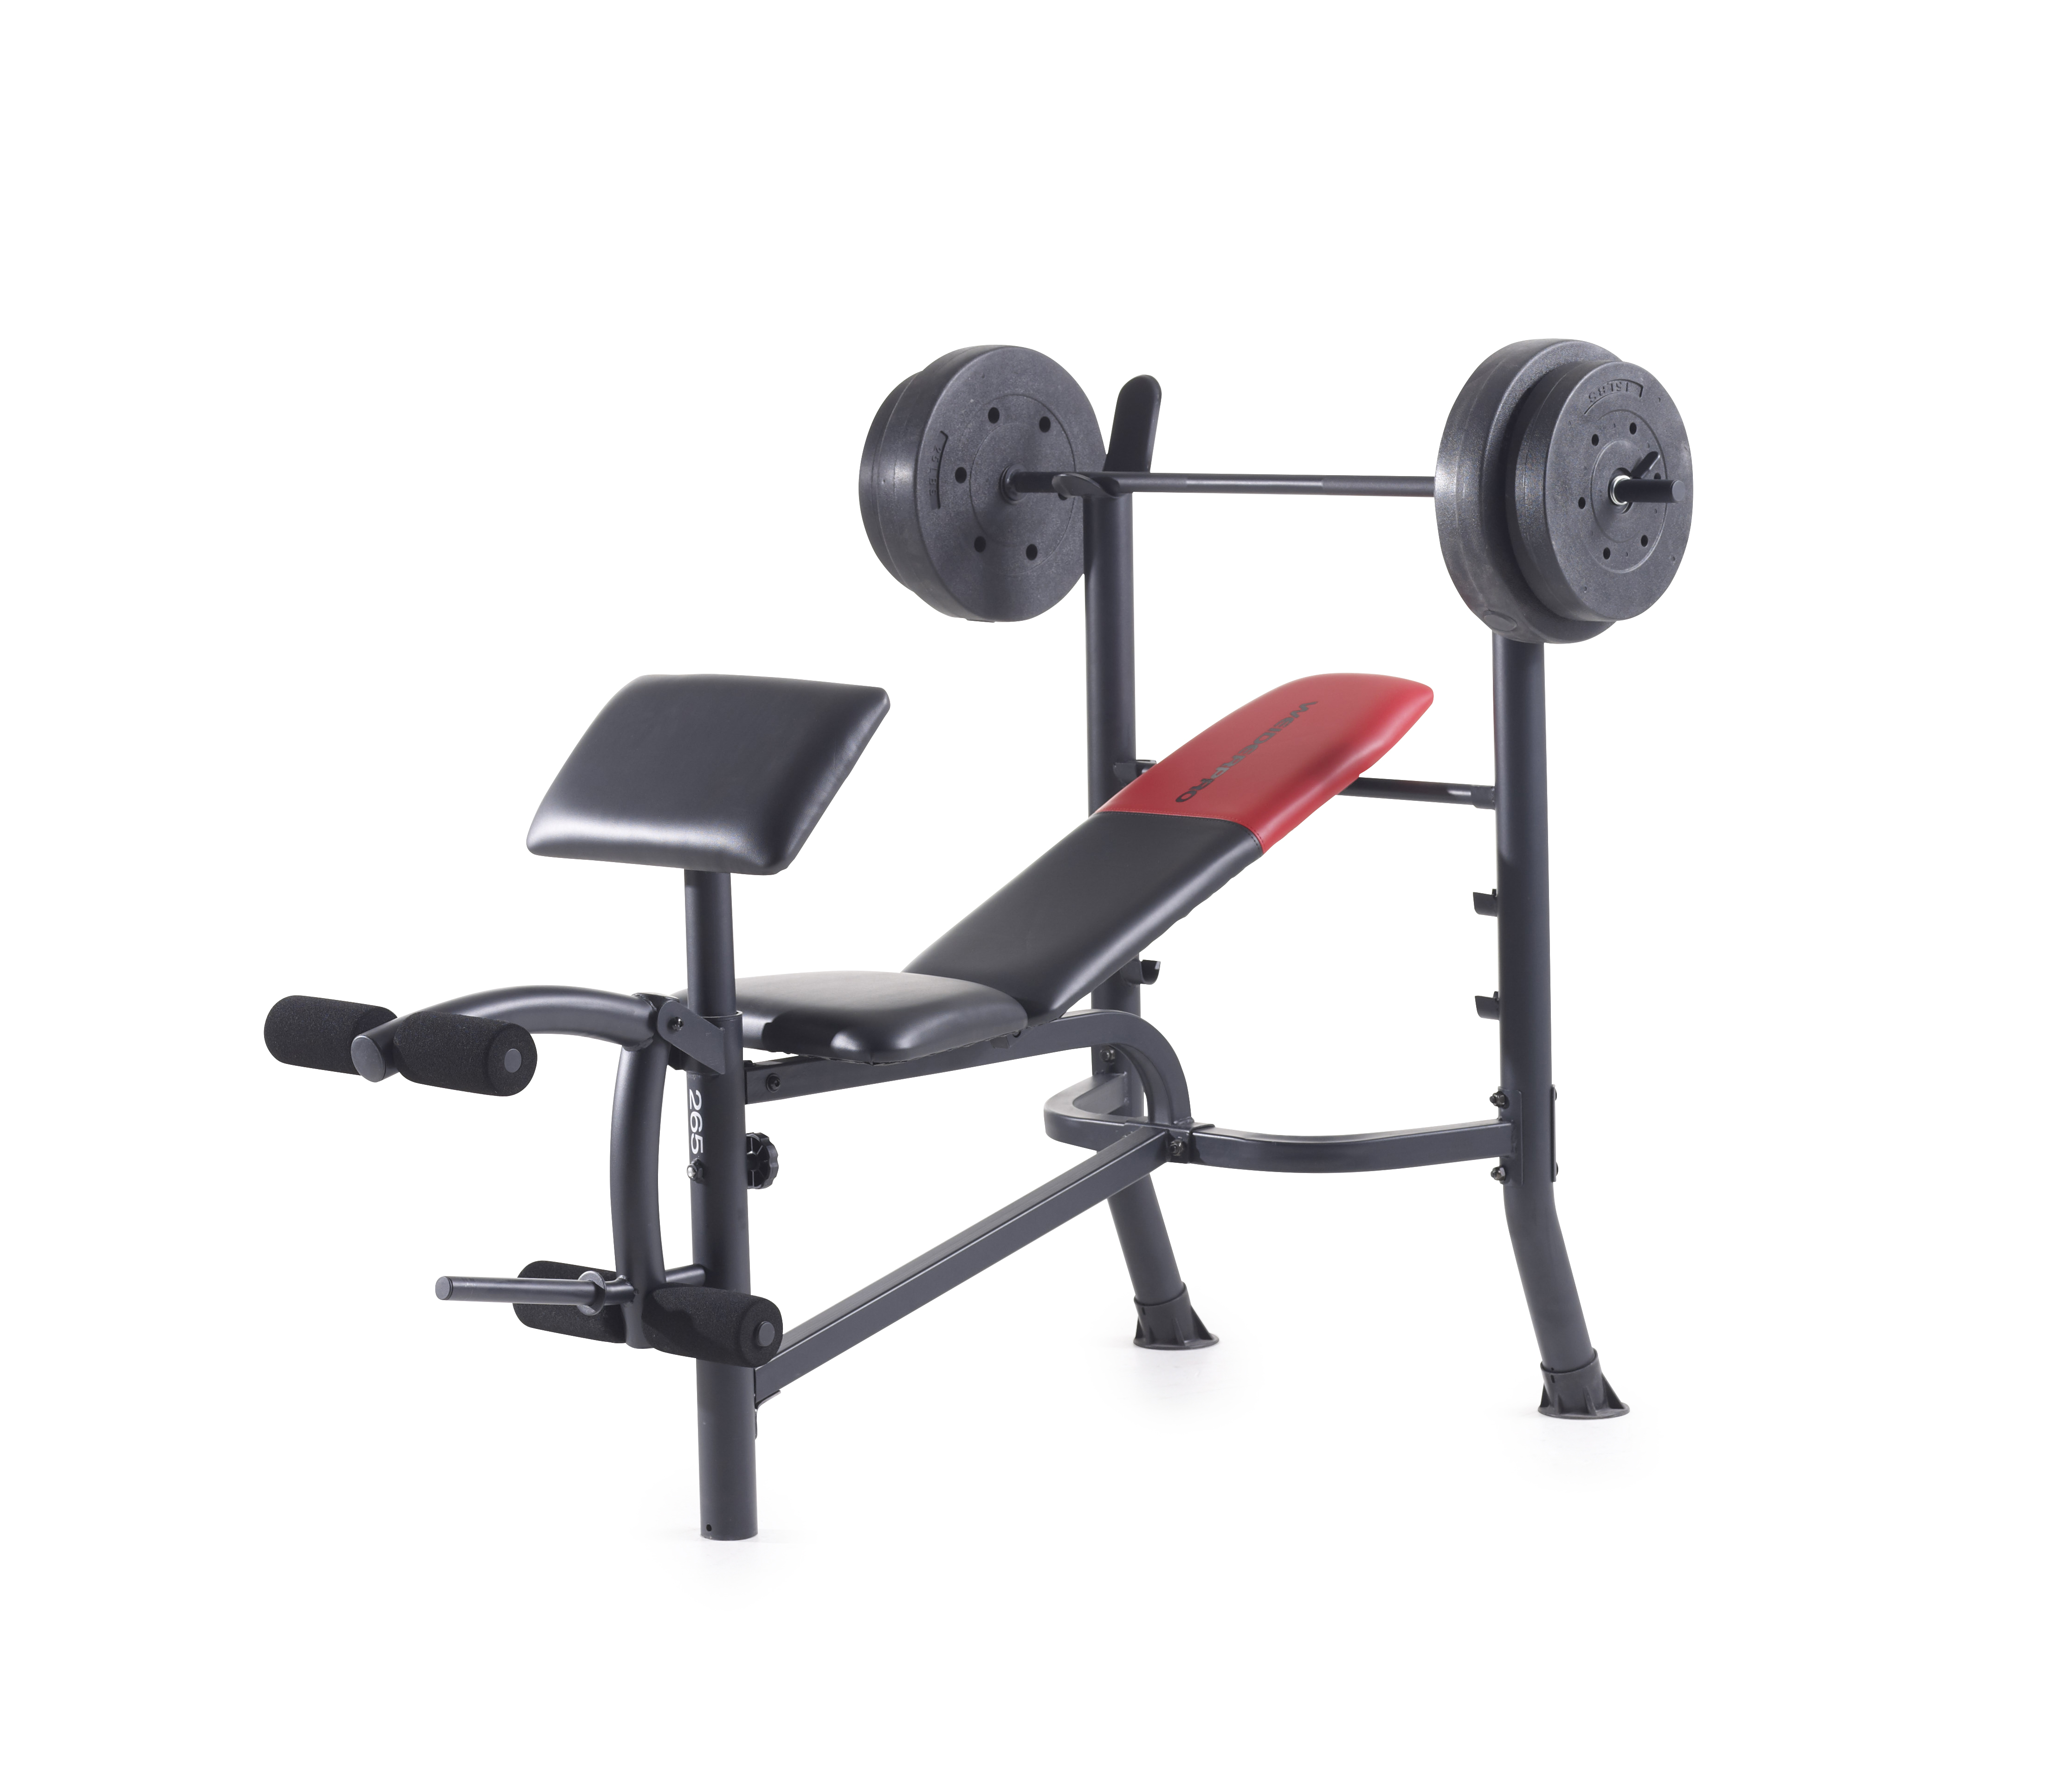 Weight Bench Set Adjustable Home Gym Press Lifting Barbell Exercise Workout